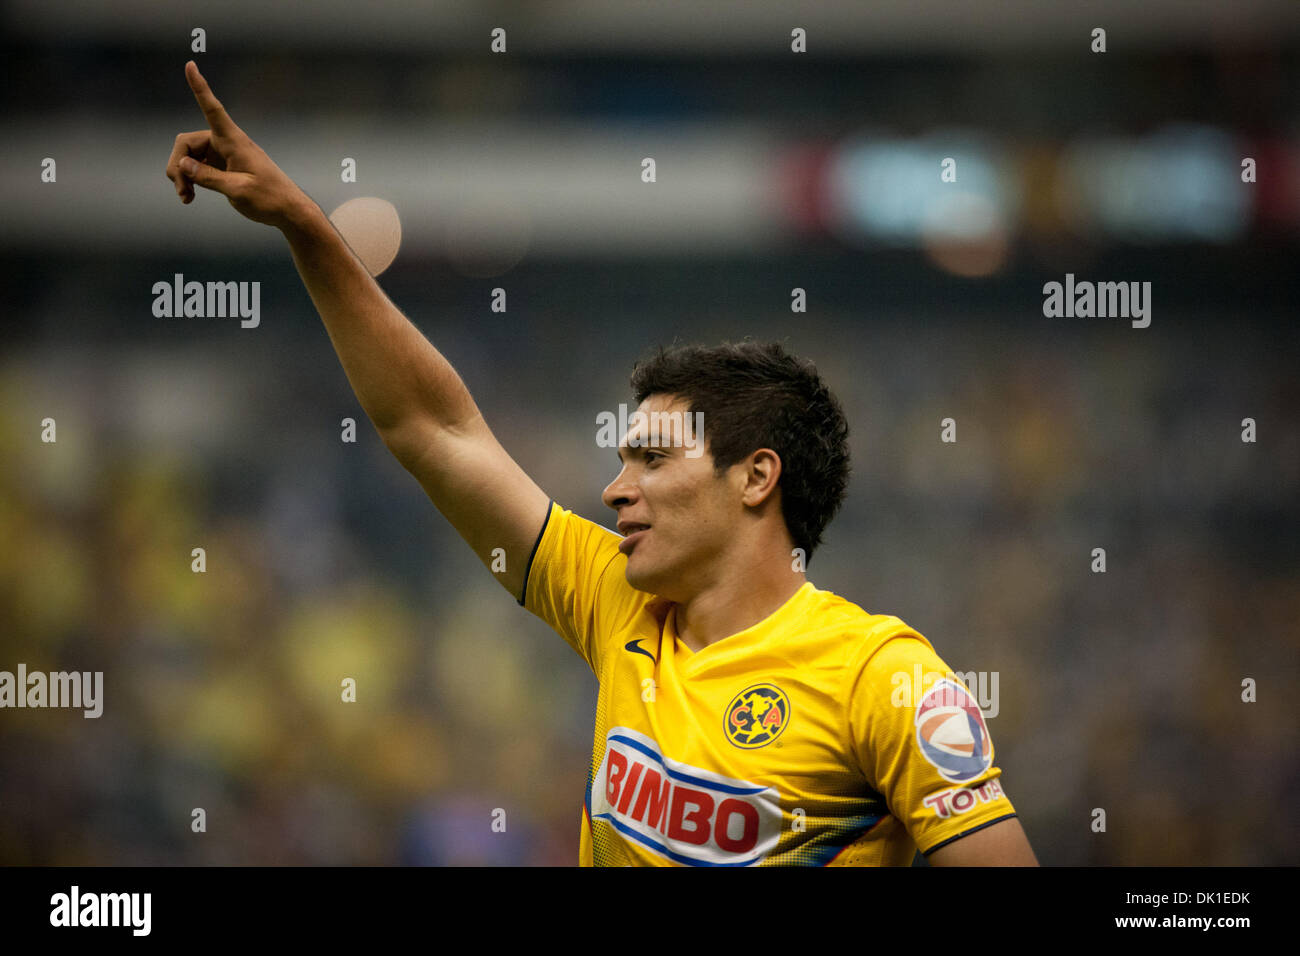 Mexico City, Mexico. 1st December 2013. America's Raul Jimenez celebrates after scoring during a match of the Liga MX against Tigres, held in the Azteca Stadium in Mexico City, capital of Mexico, on Dec. 1, 2013. (Xinhua/Pedro Mera/Alamy Live News) Stock Photo